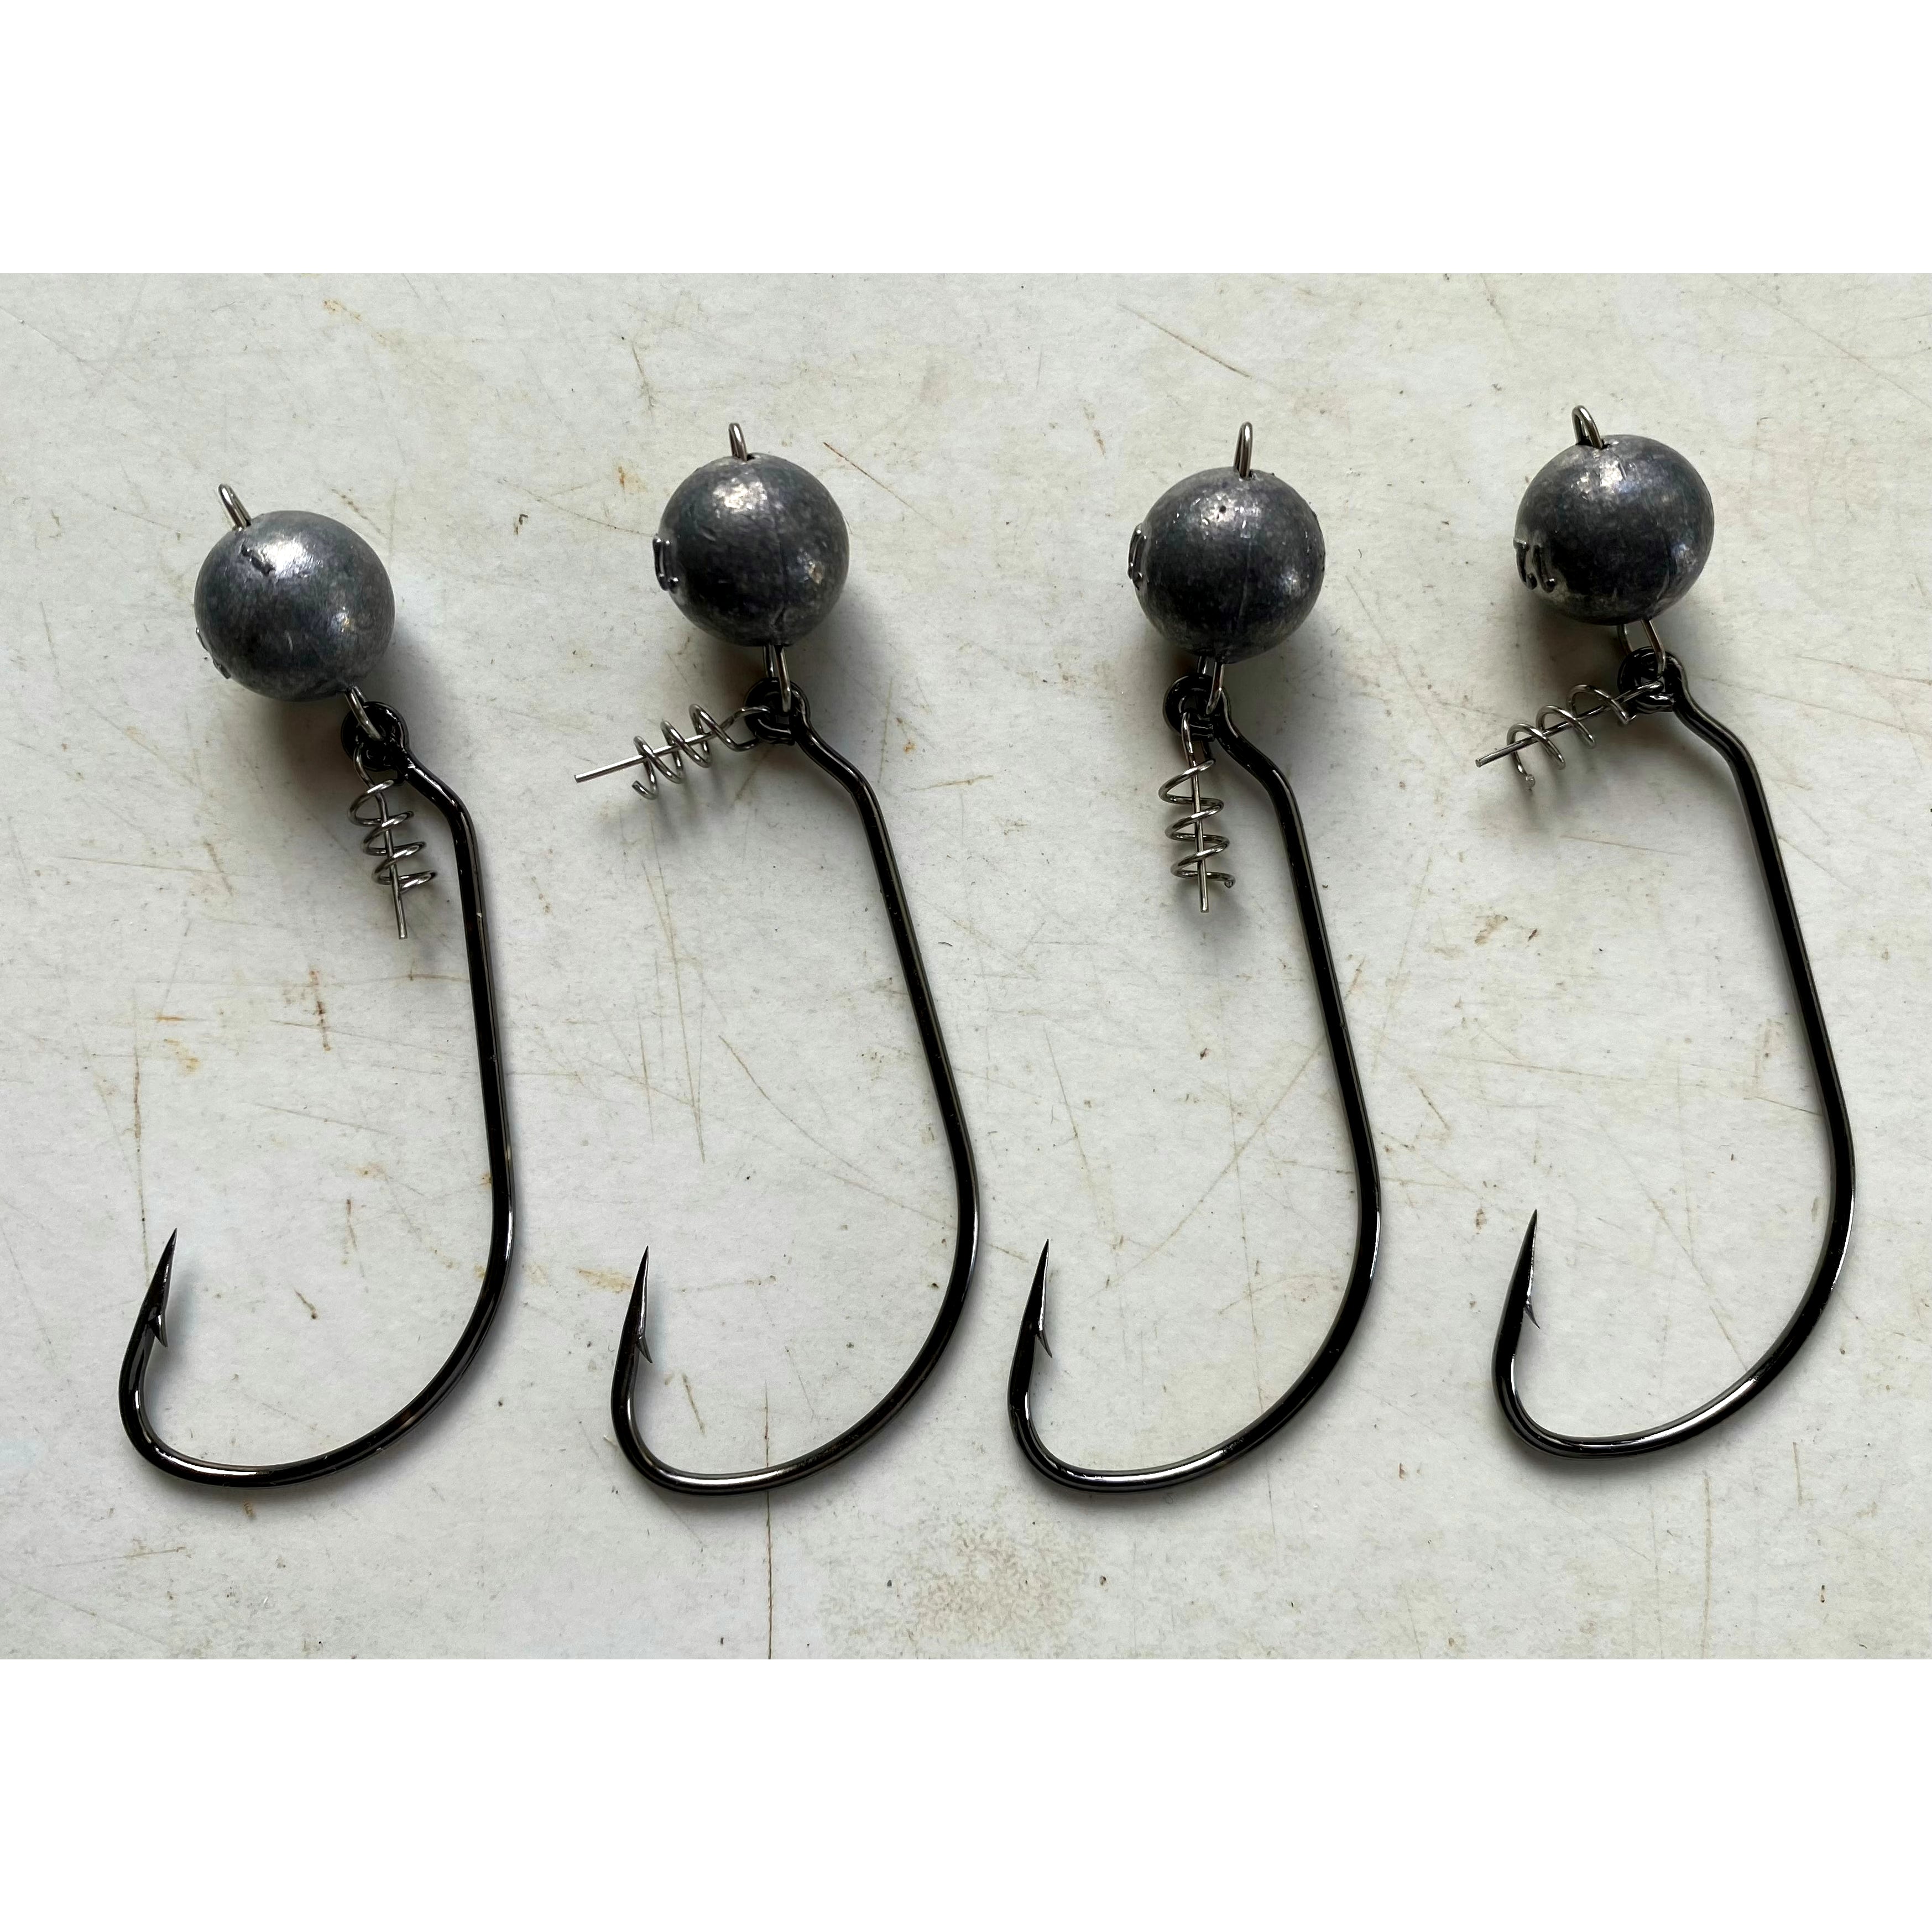  Weighted Fishing Hooks,Weedless Swimbait Hooks with Twistlock  Centering Pin,Soft Plastics Worm Fishing Hooks for Saltwater Freshwater  Bass Trout (5 Sizes) : Sports & Outdoors